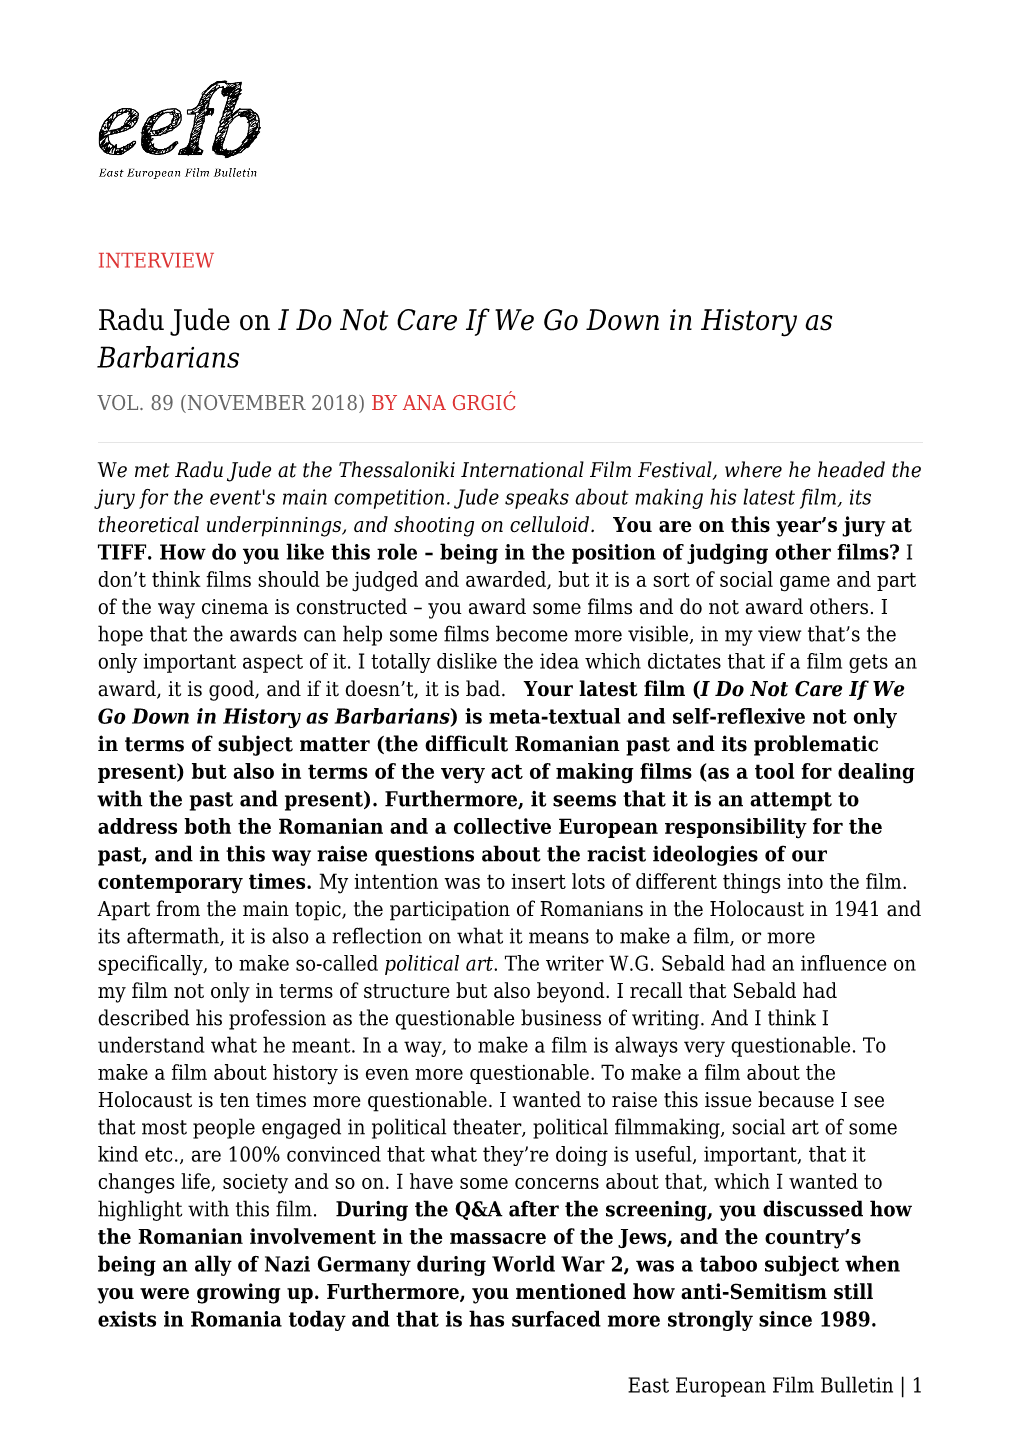 Radu Jude on I Do Not Care If We Go Down in History As Barbarians VOL